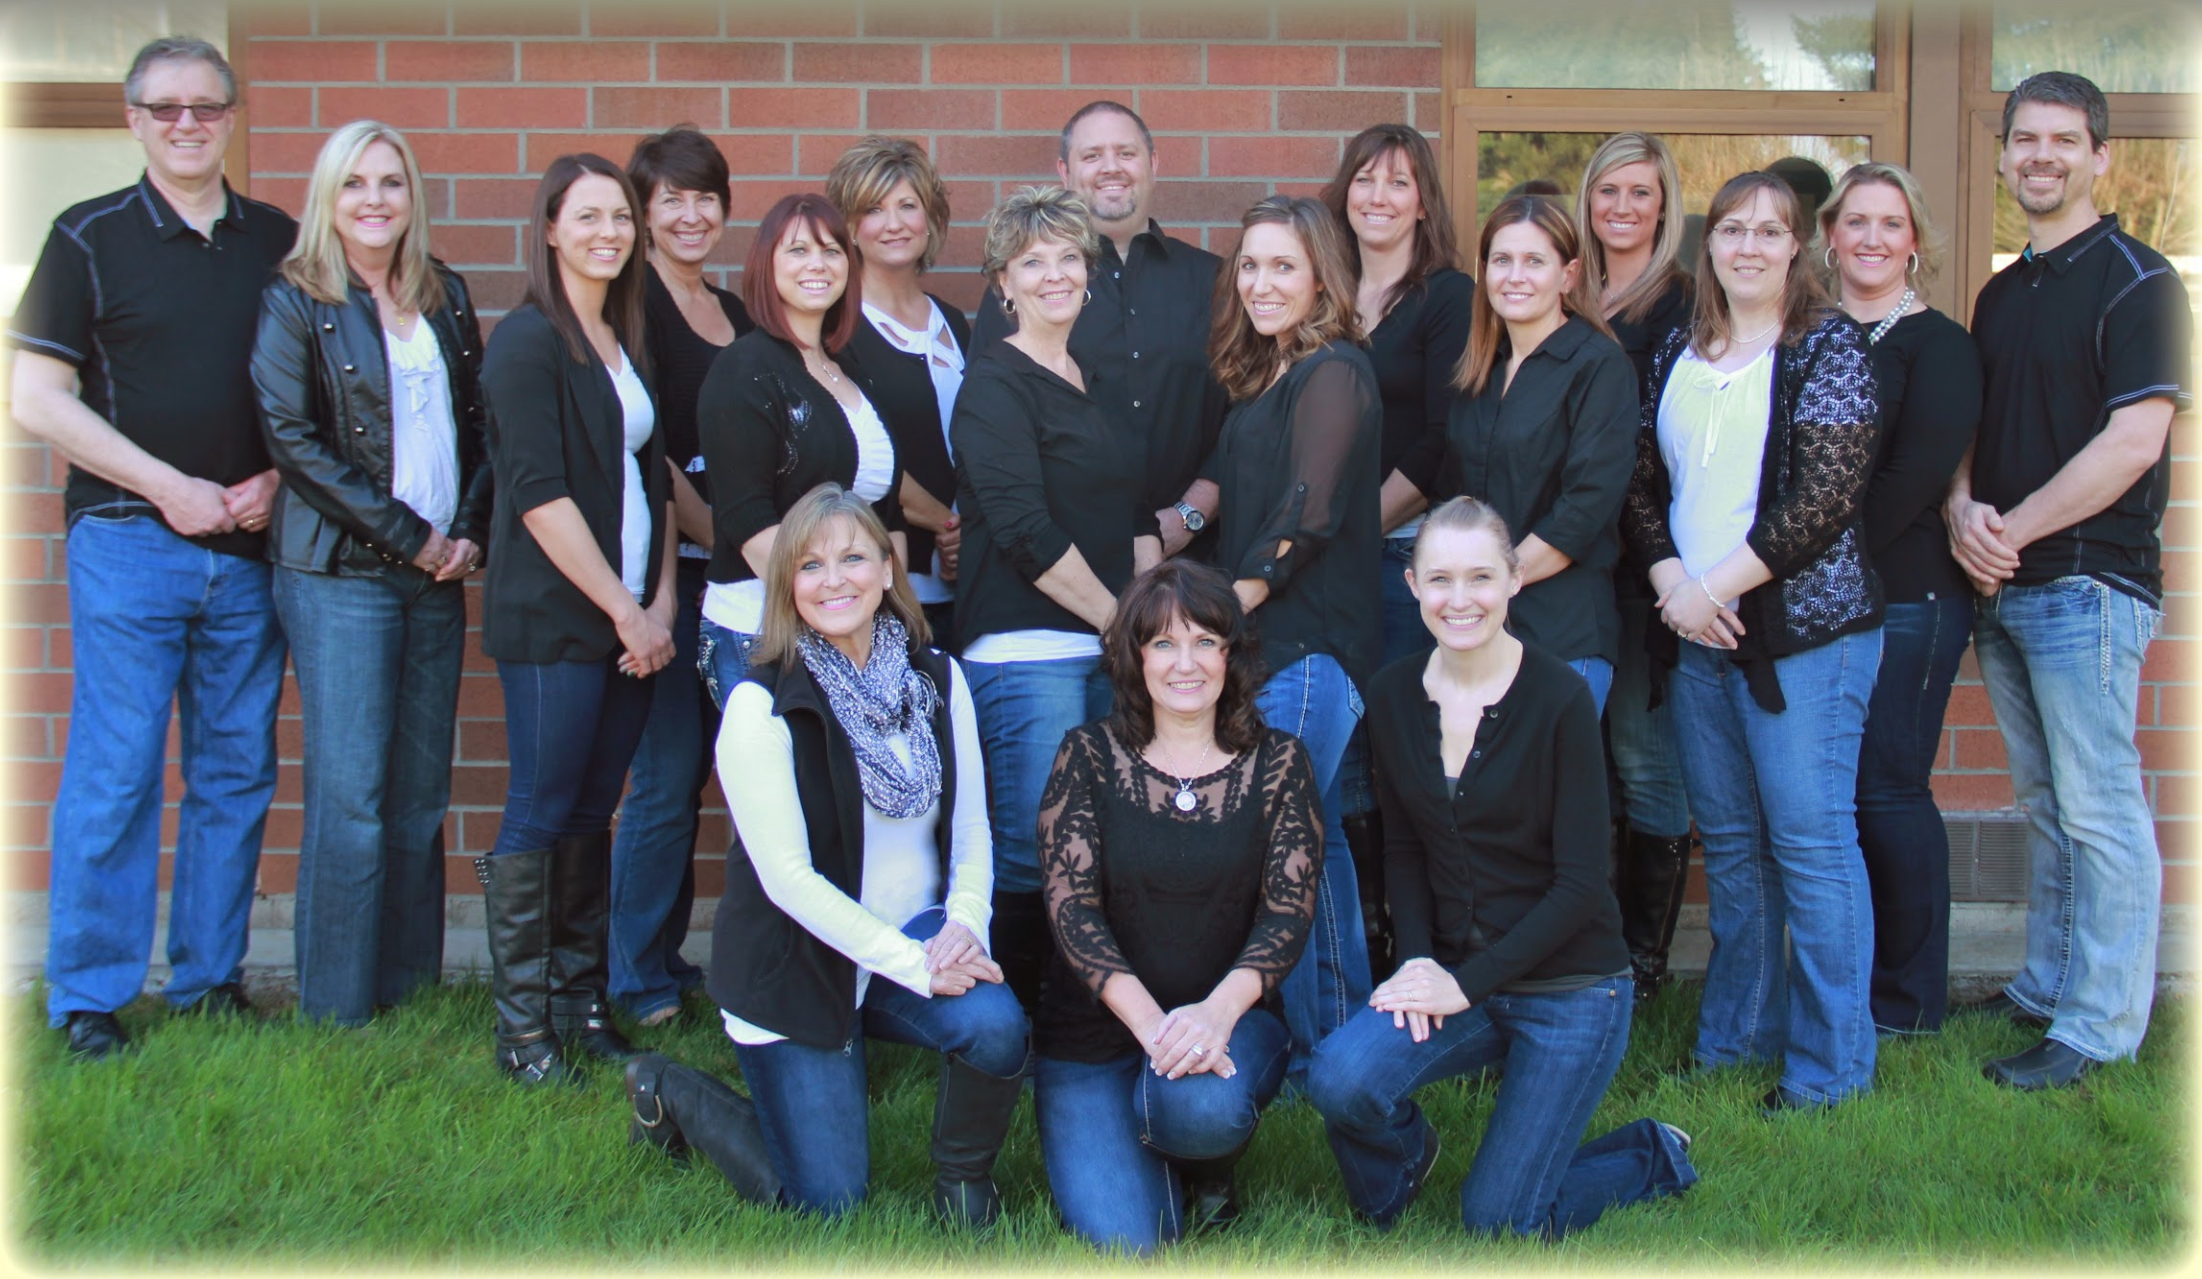 Ash & Roberts DDS | Cosmetic Dentist & Implants--Dentist in Centralia and Chehalis WA